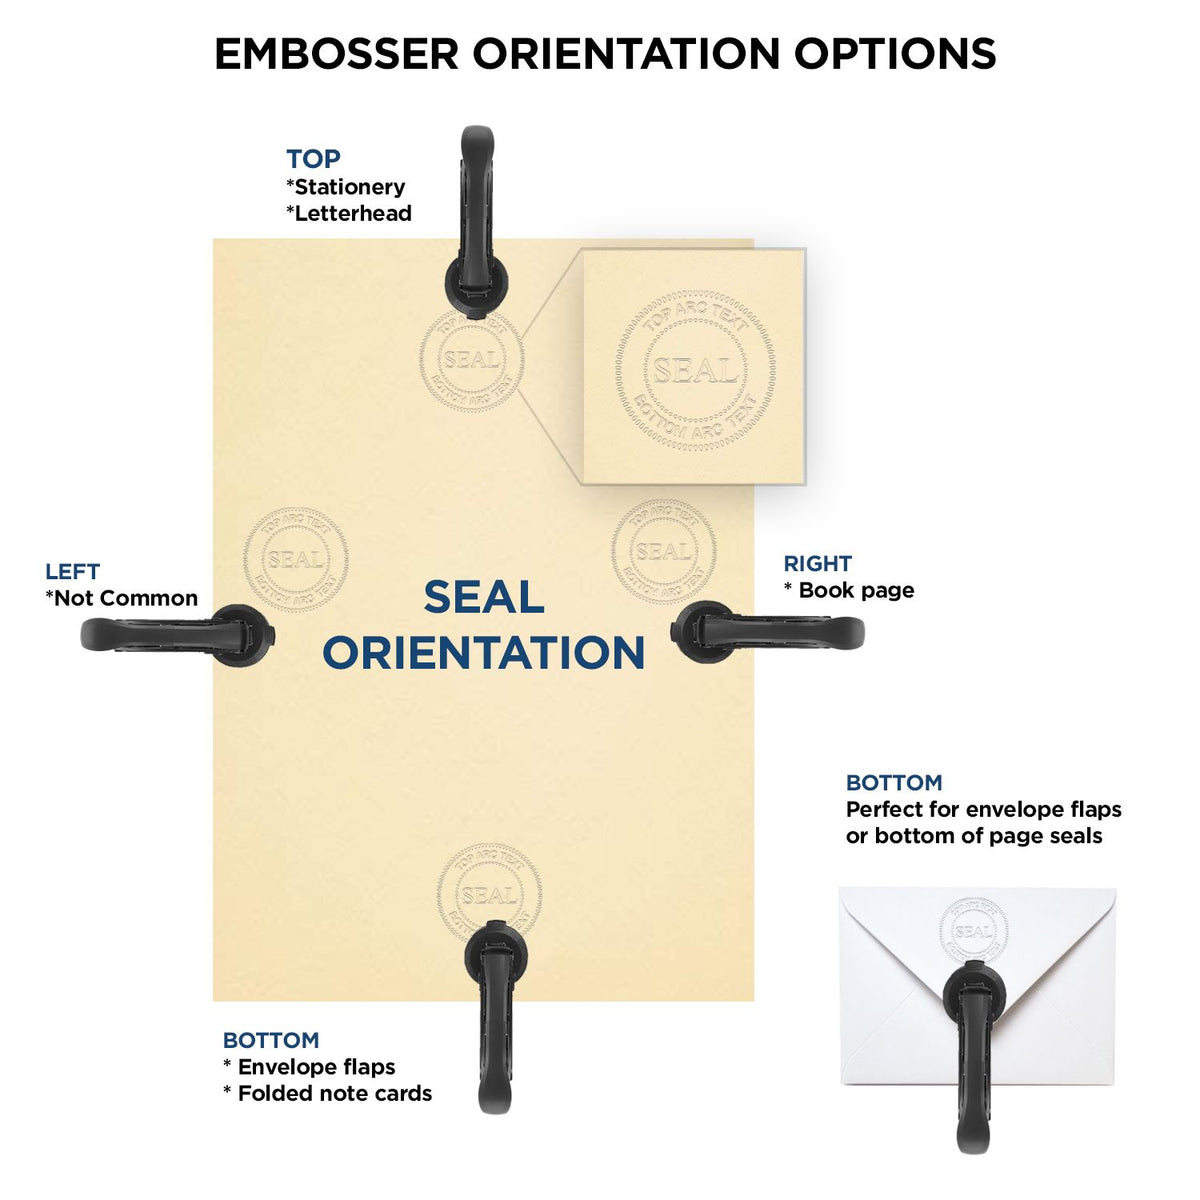 An infographic for the Handheld Nevada Land Surveyor Seal showing embosser orientation, this is showing examples of a top, bottom, right and left insert.